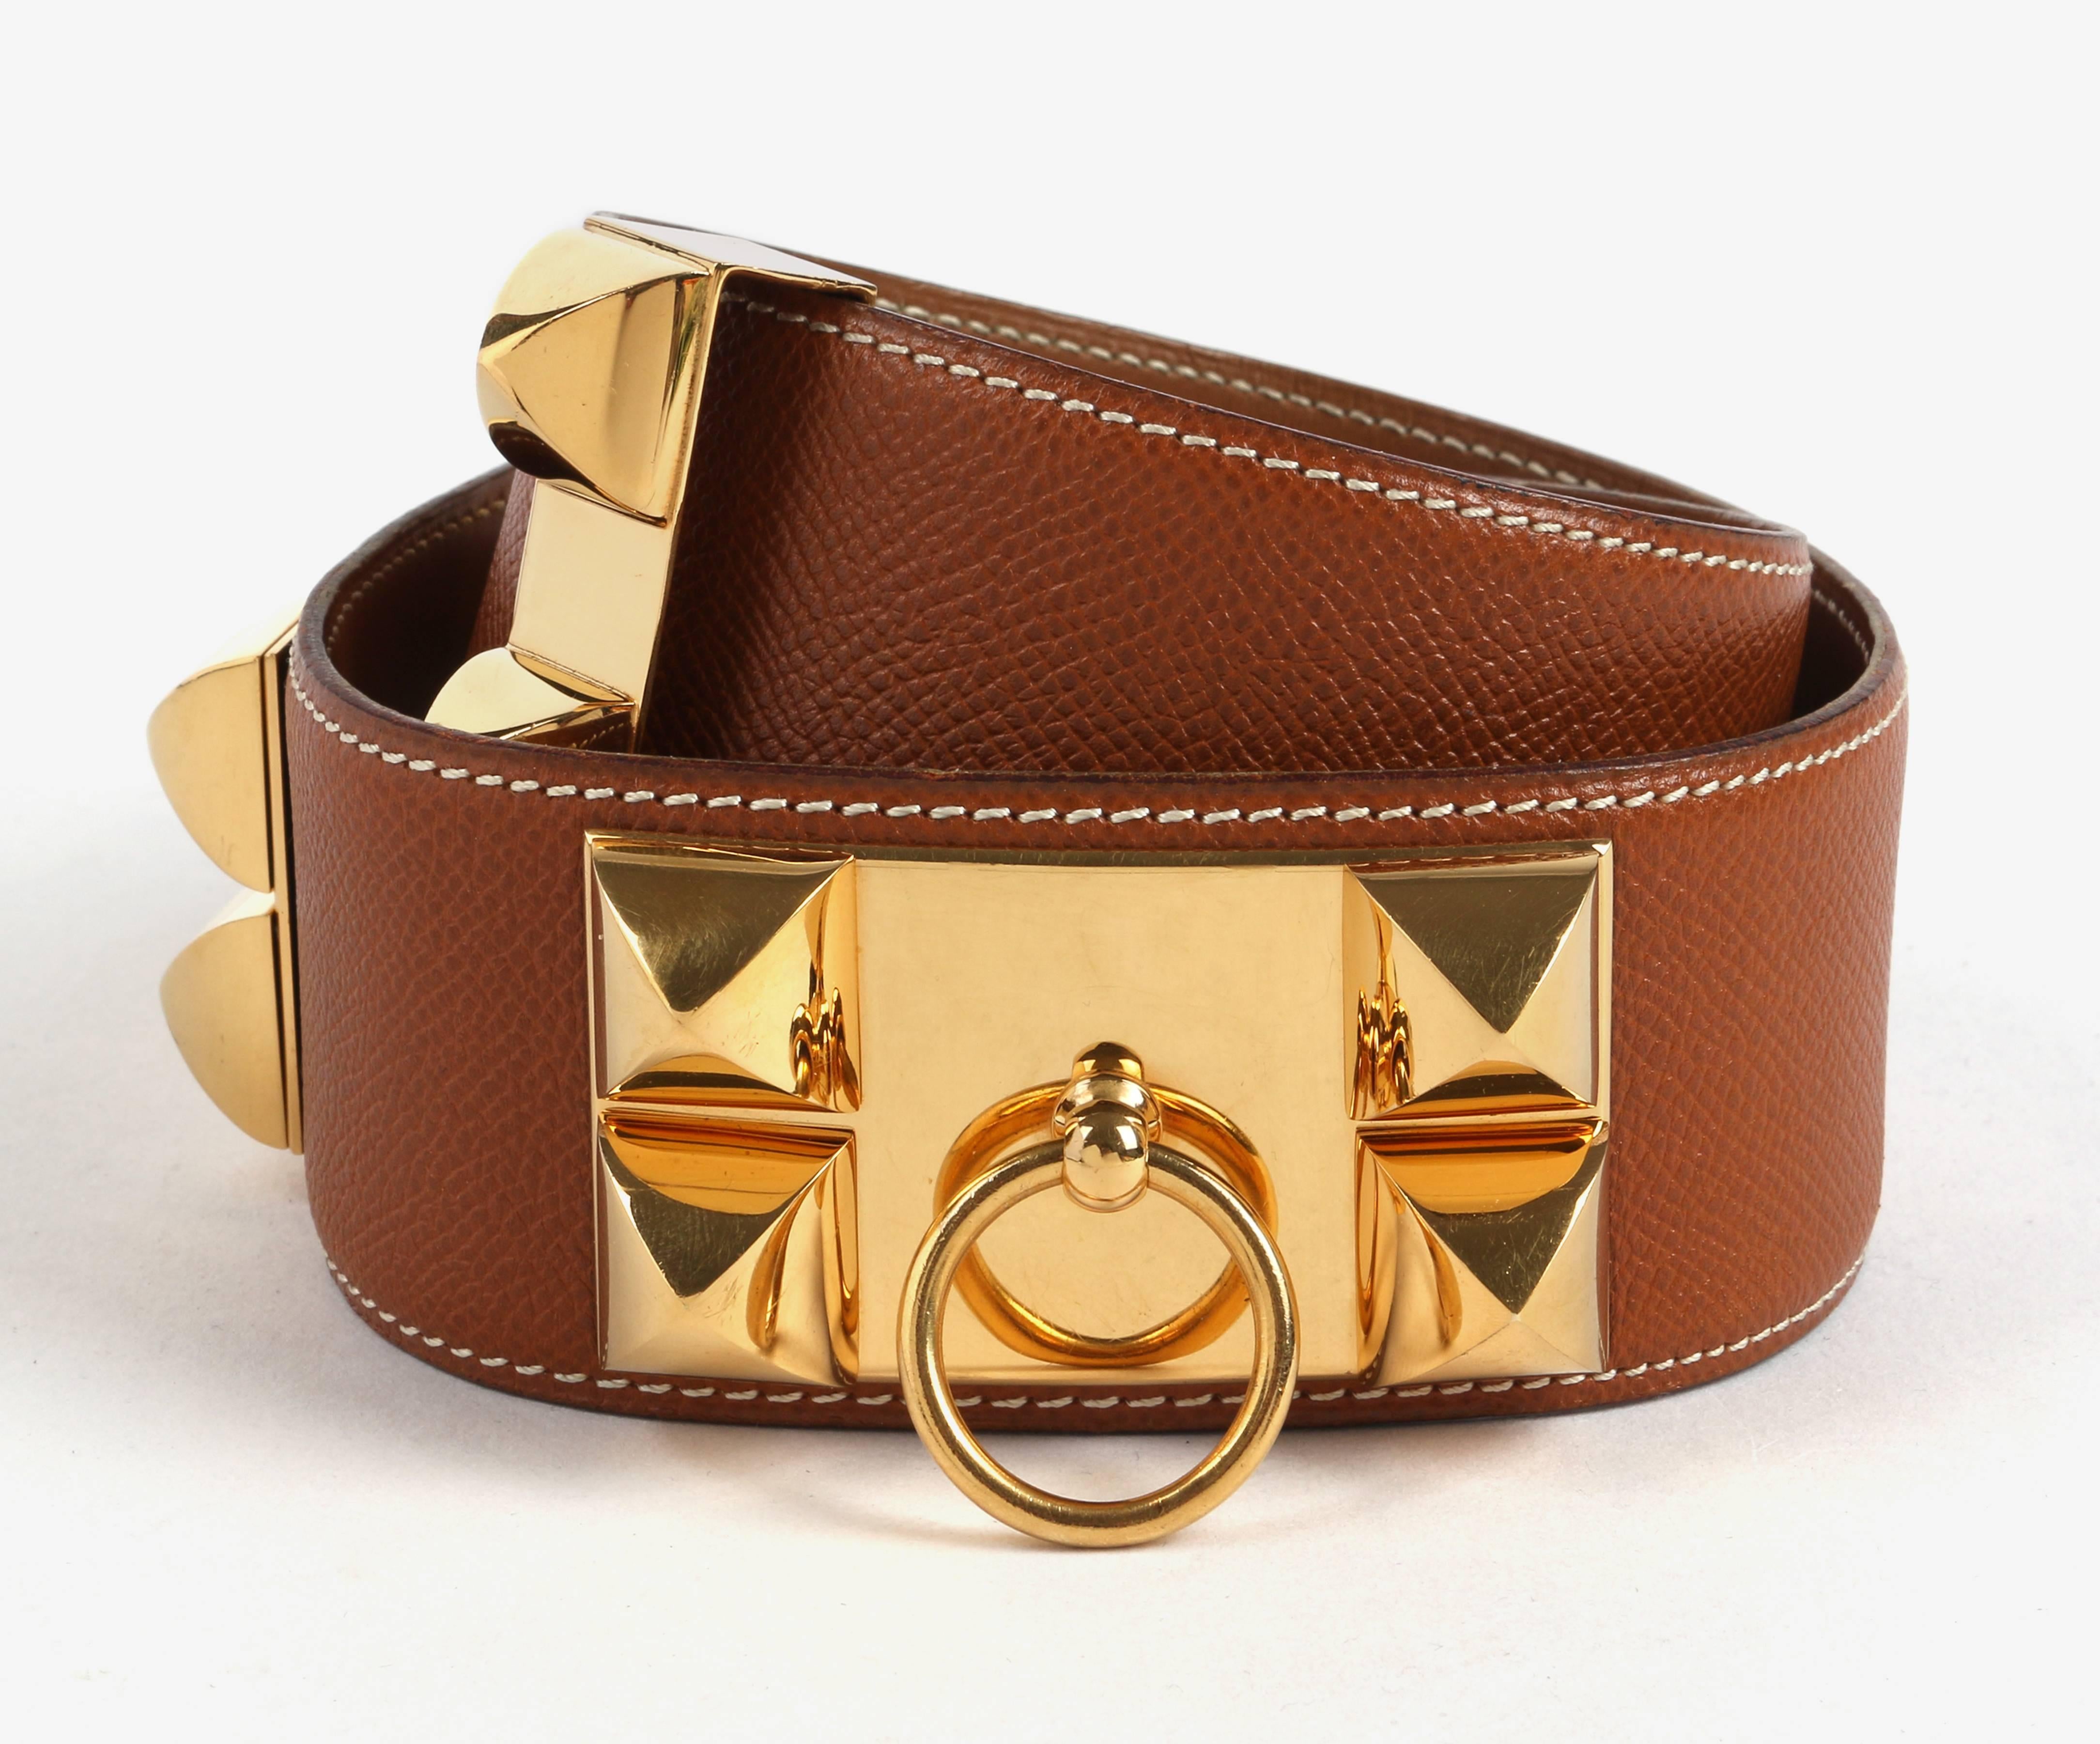 Hermes women's c.1992 Collier de Chien tan Courchevel leather belt. Medor gold plated buckle/hardware. Hardware is stamped 